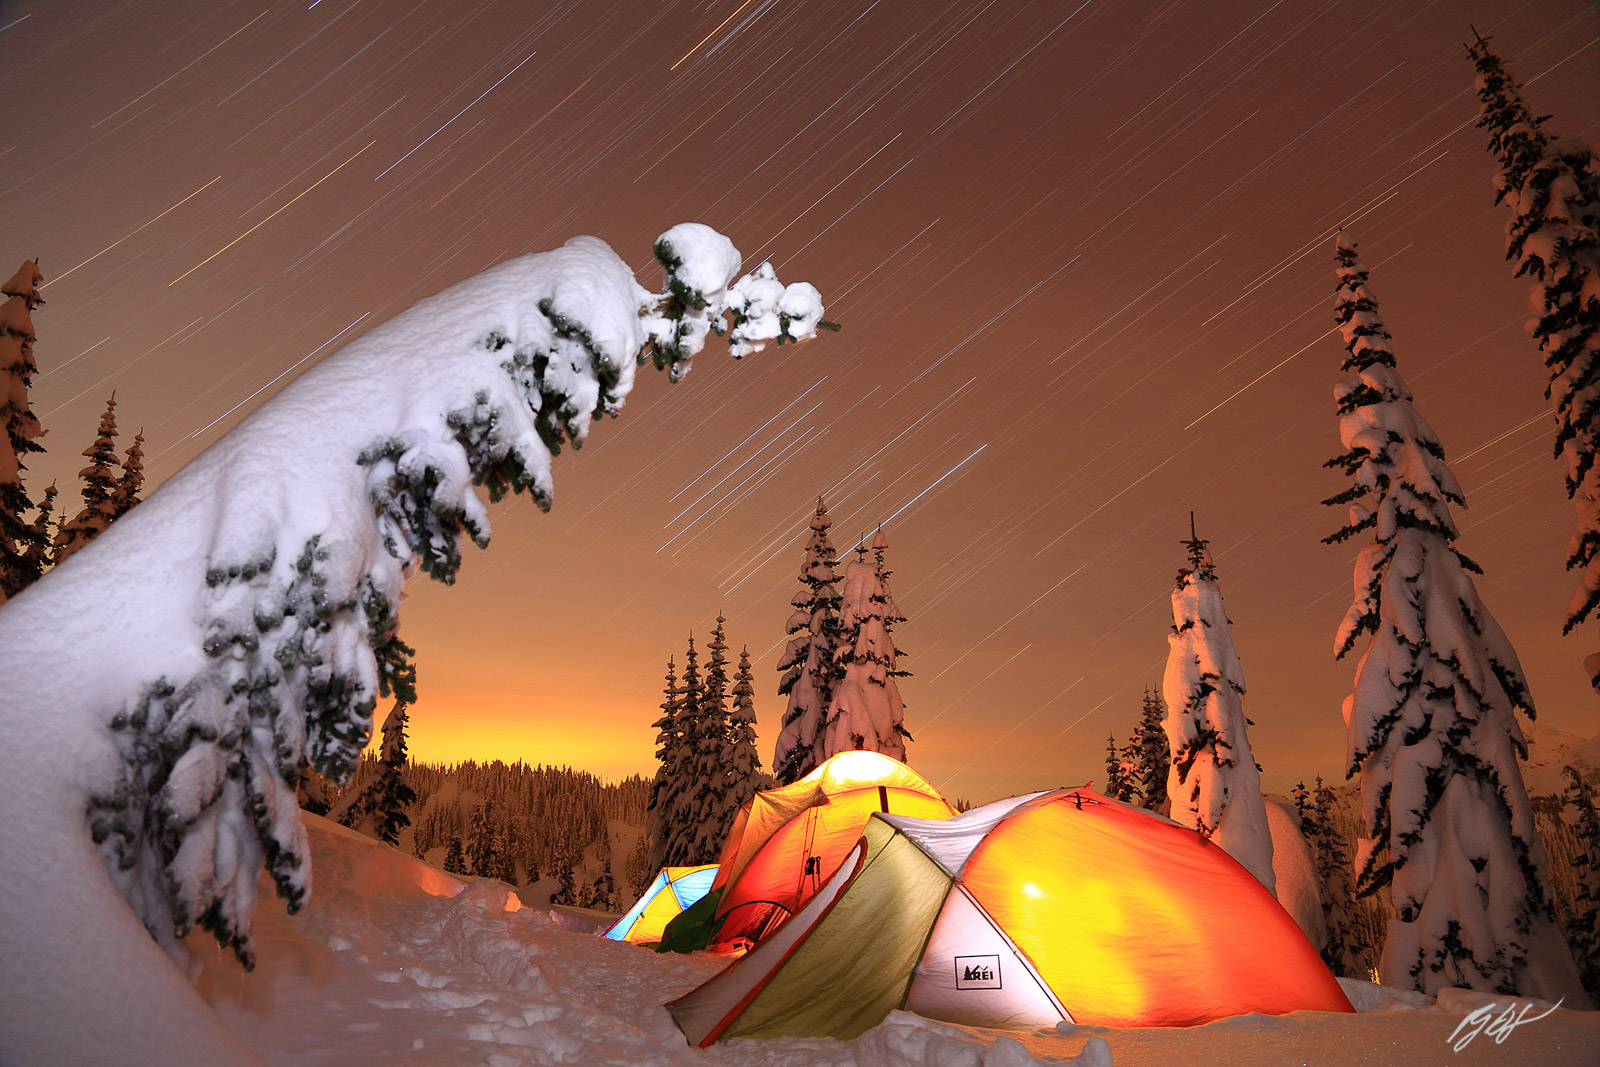 Star Trails and Winter Camp in Mt Rainier National Park in Washington